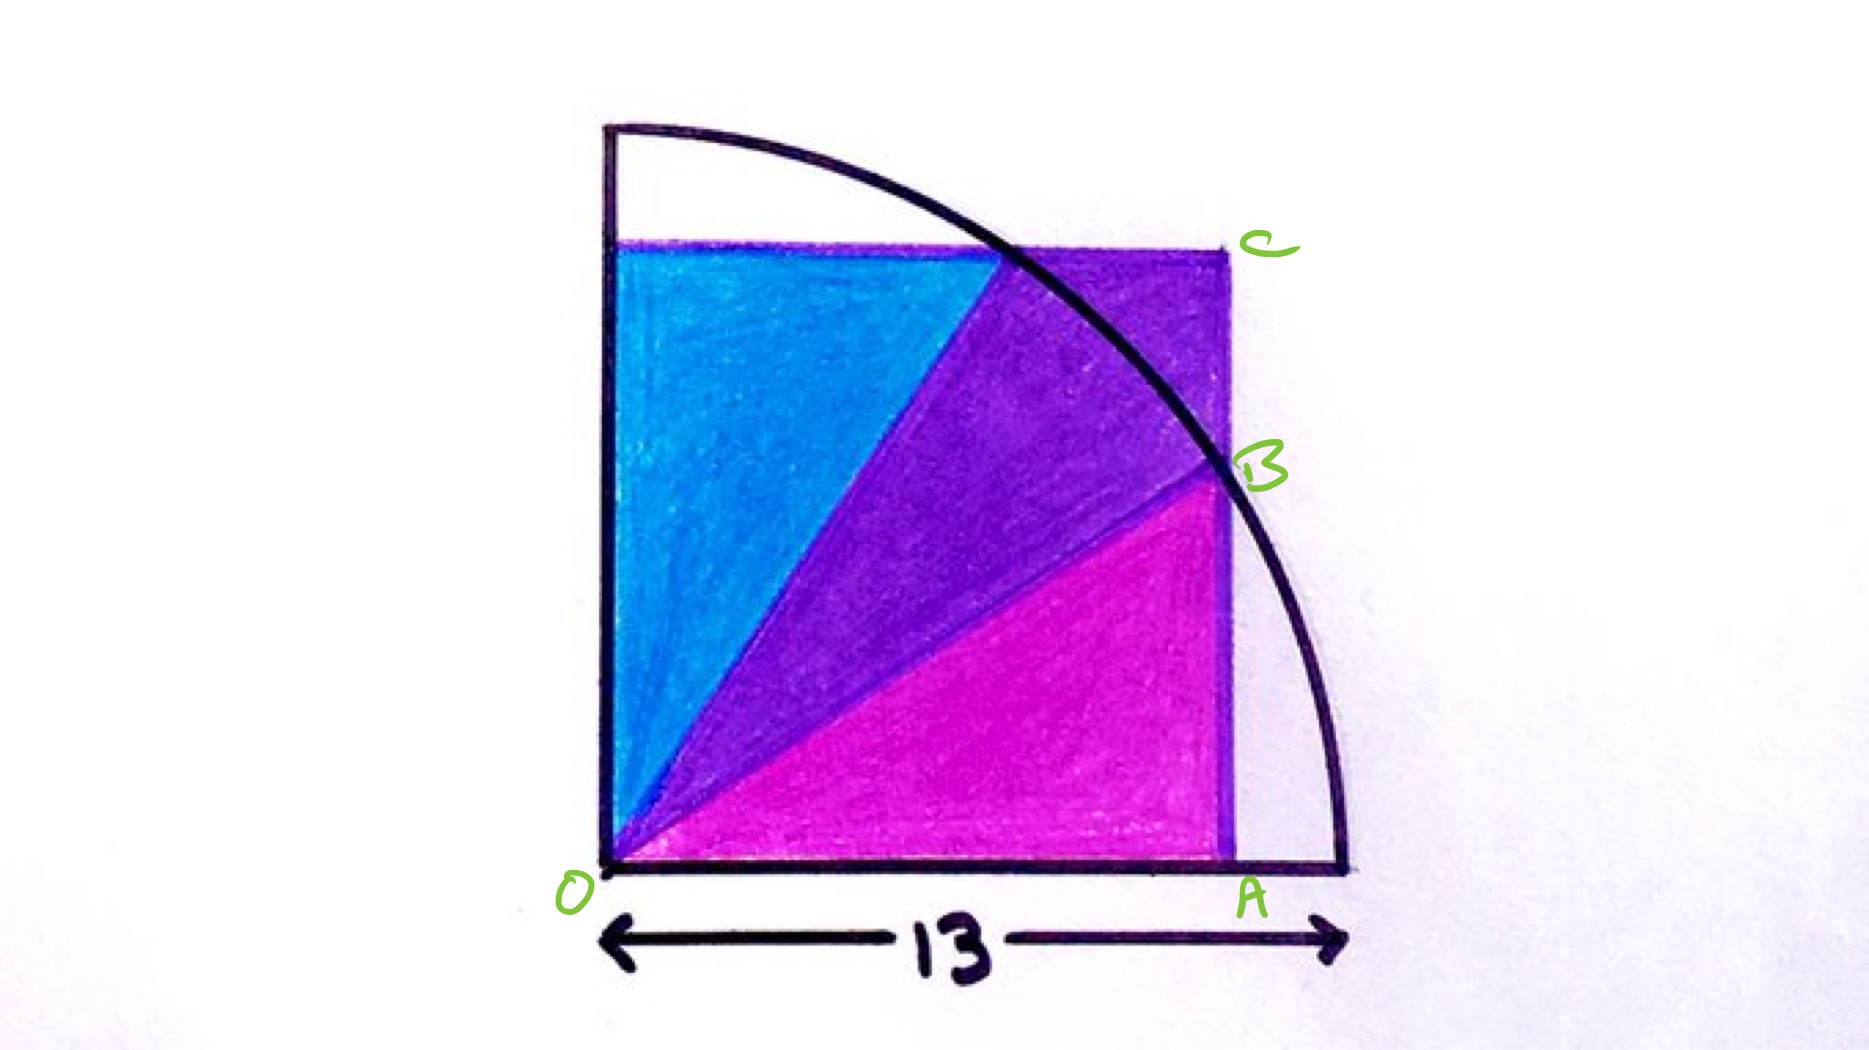 Square overlapping a quarter circle labelled